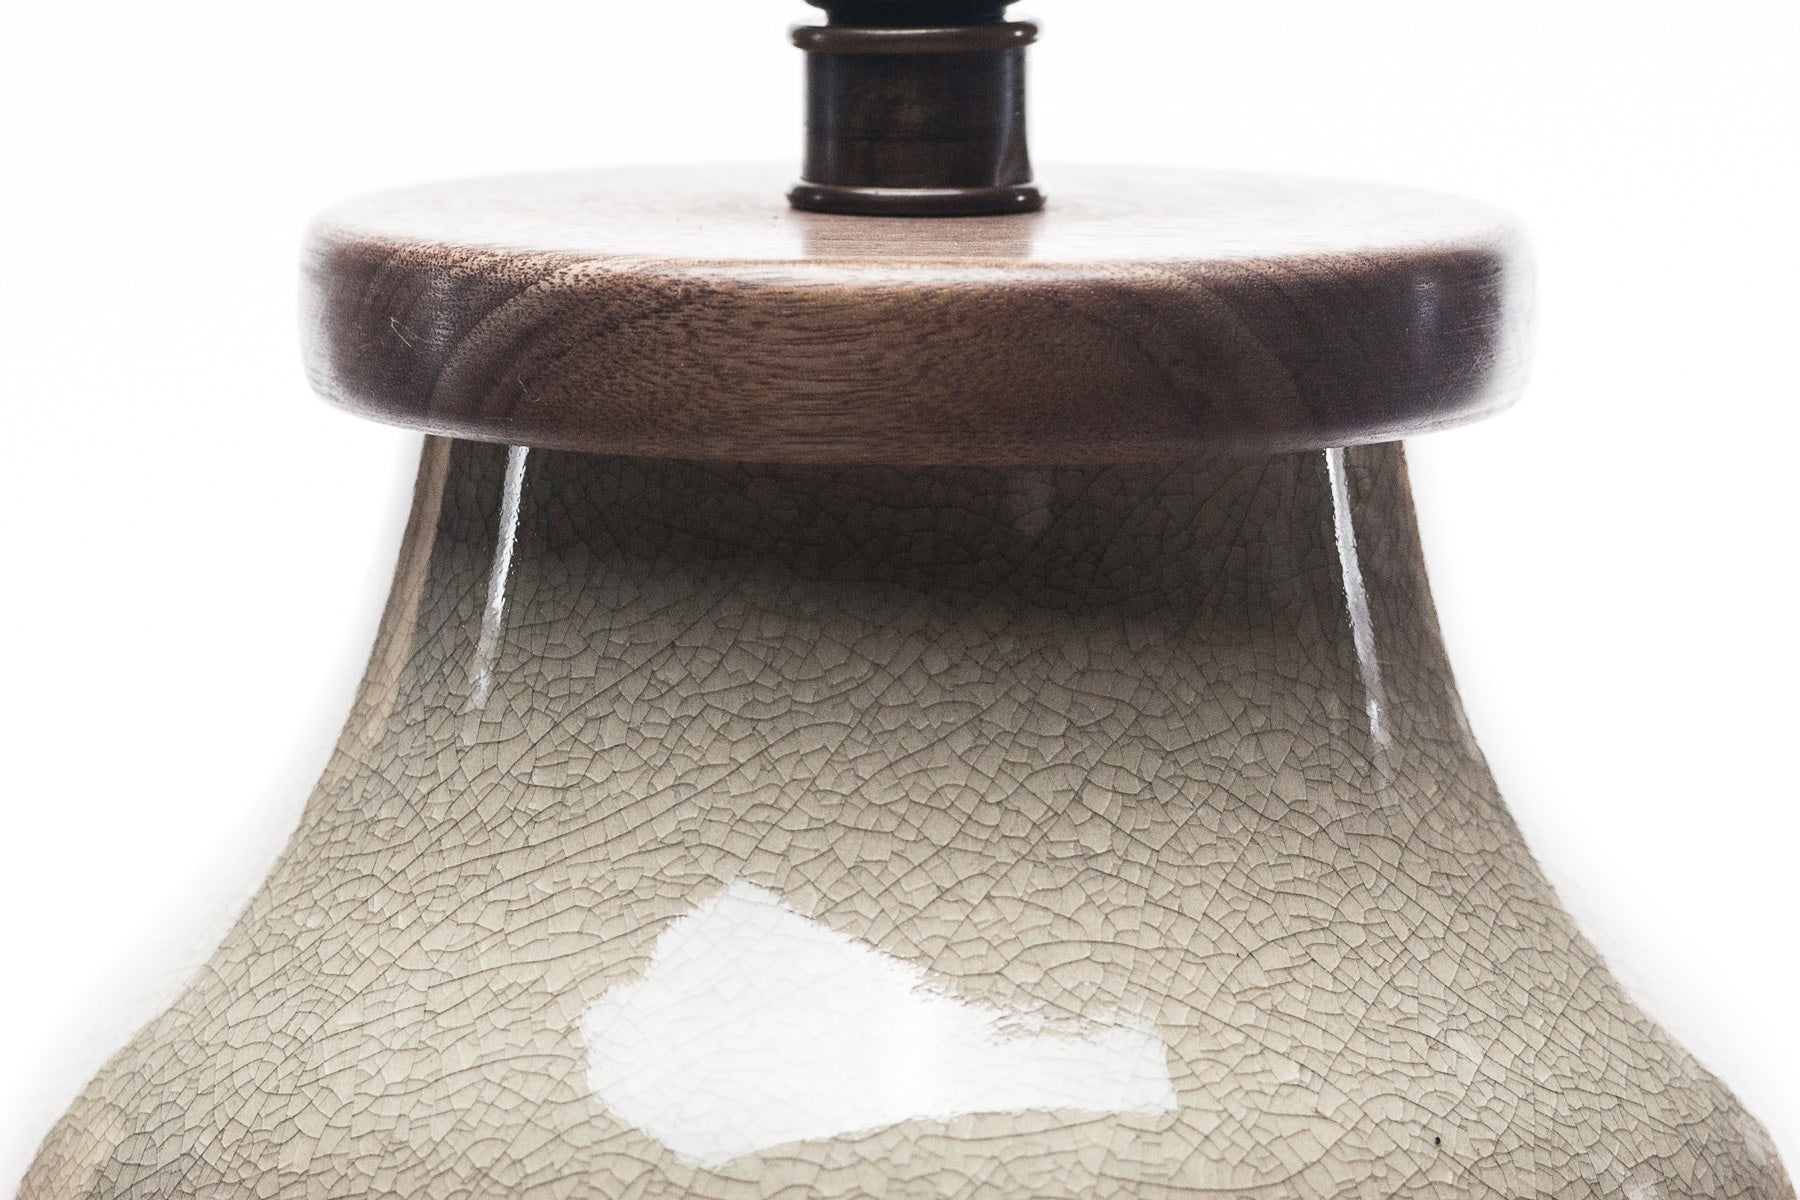 Lawrence & Scott Lagom Porcelain Table Lamp in Oyster Gray Crackle with Walnut Base